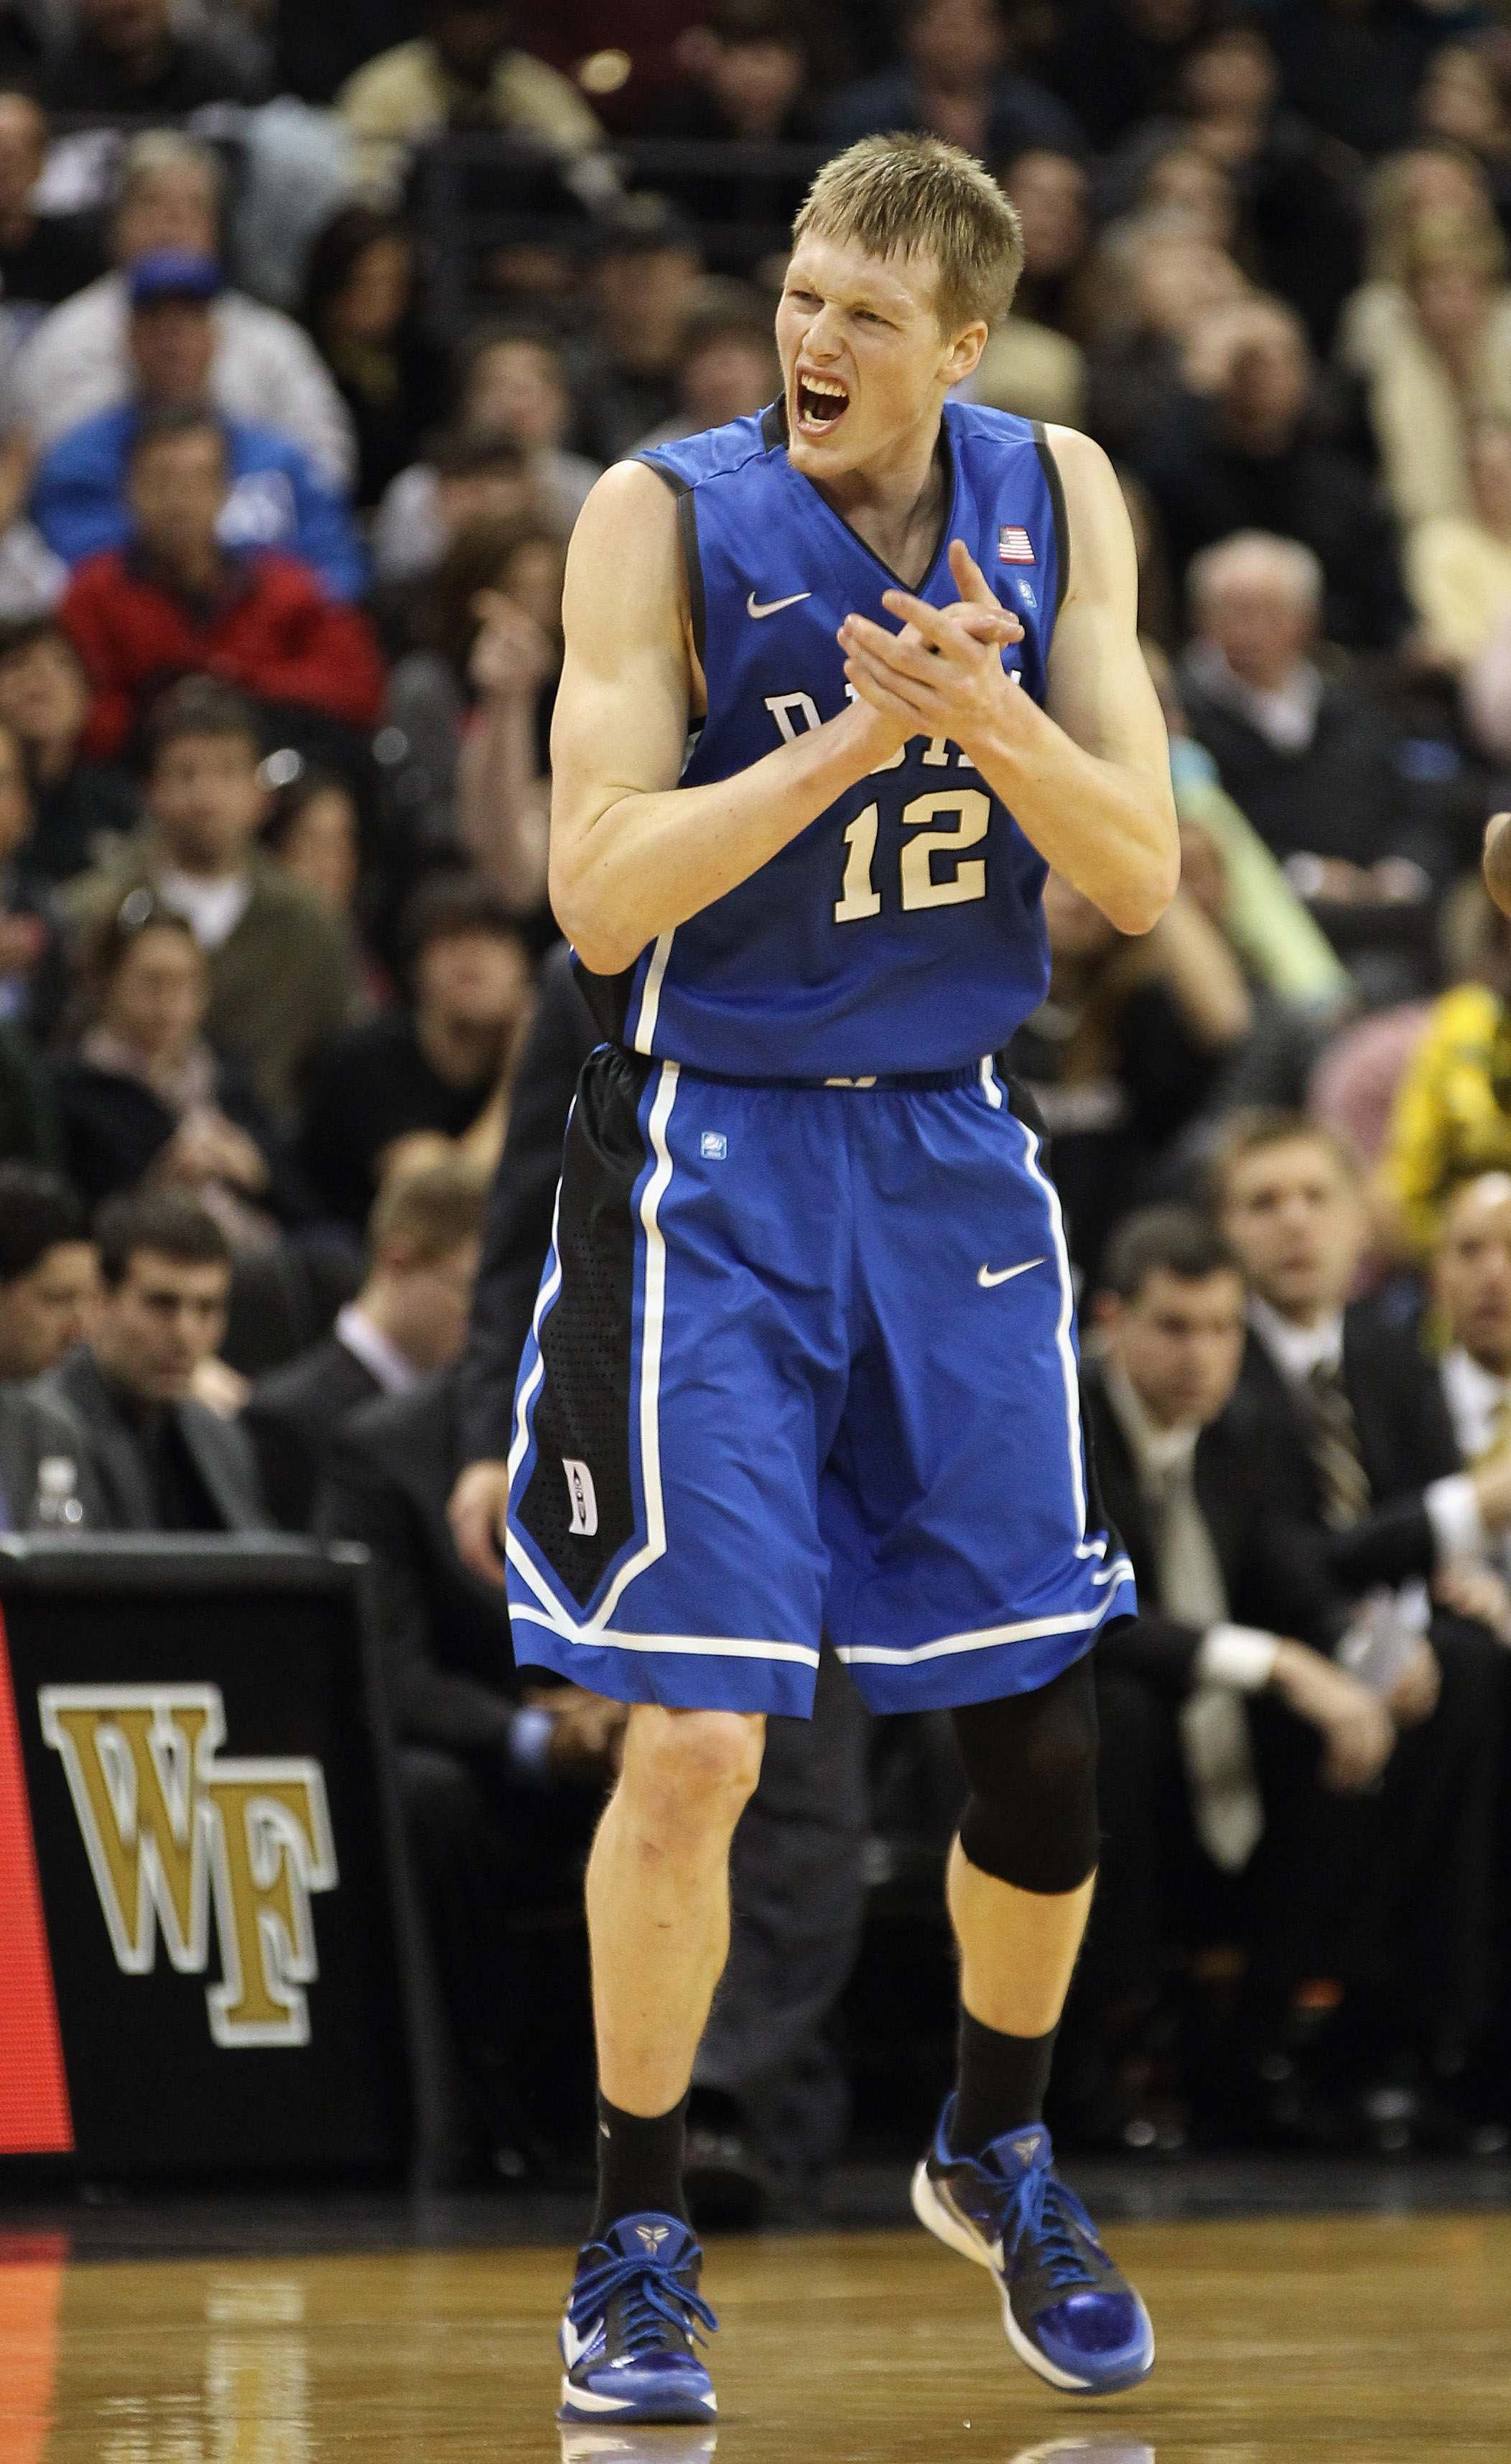 WINSTON SALEM, NC - JANUARY 22:  Kyle Singler #12 of the Duke Blue Devils reacts to a play during their game against the Wake Forest Demon Deacons at Lawrence Joel Coliseum on January 22, 2011 in Winston Salem, North Carolina.  (Photo by Streeter Lecka/Ge